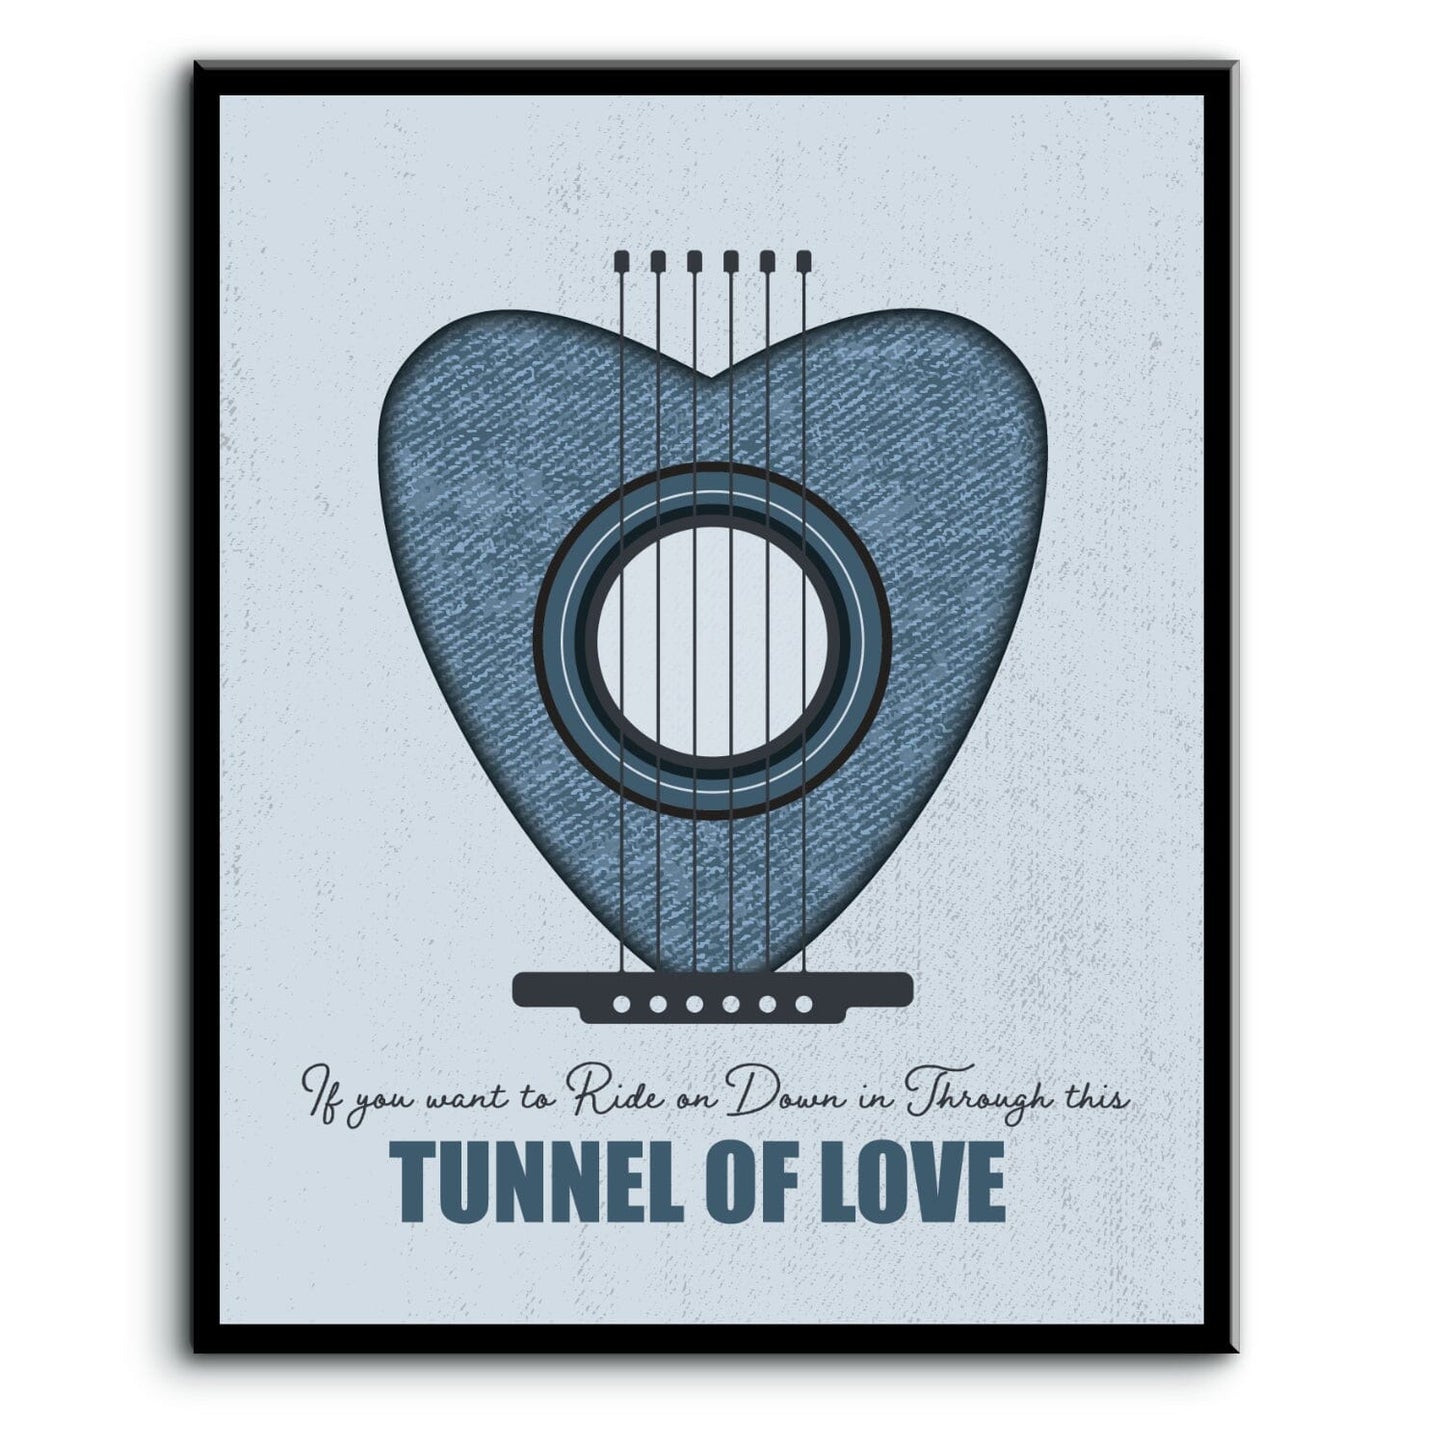 Tunnel of Love by Bruce Springsteen - Lyric Rock Music Art Song Lyrics Art Song Lyrics Art 8x10 Plaque Mount 